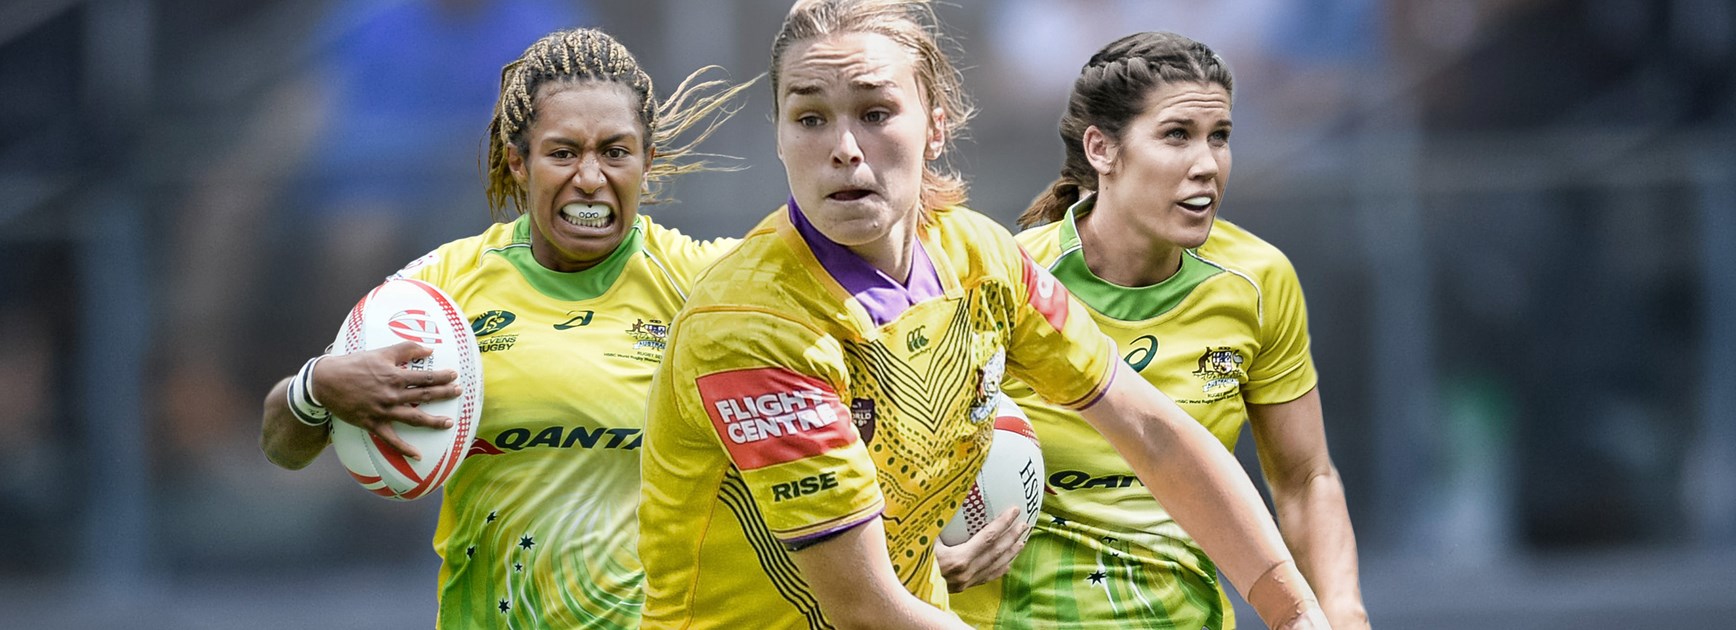 Rugby converts will fit into NRLW if they do hard yards: Dibb